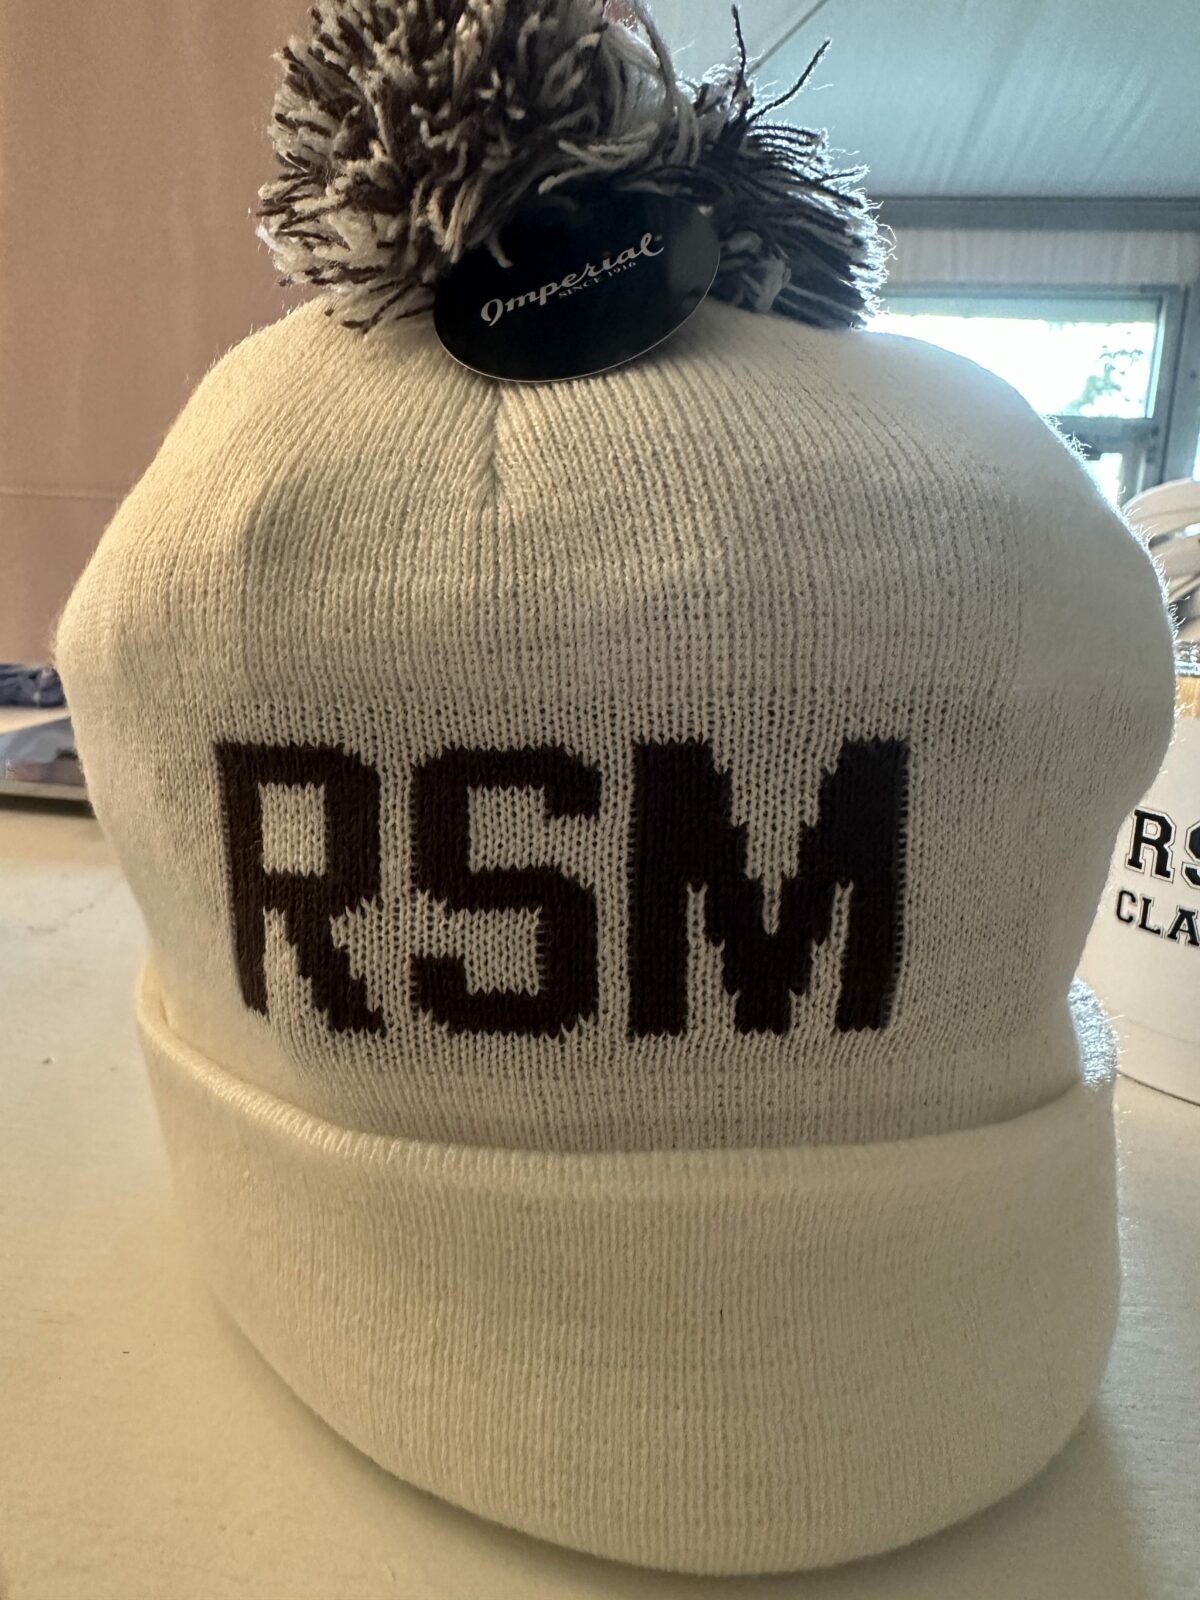 At chilly RSM Classic, winter gear is flying off the shelves at the merchandise tent